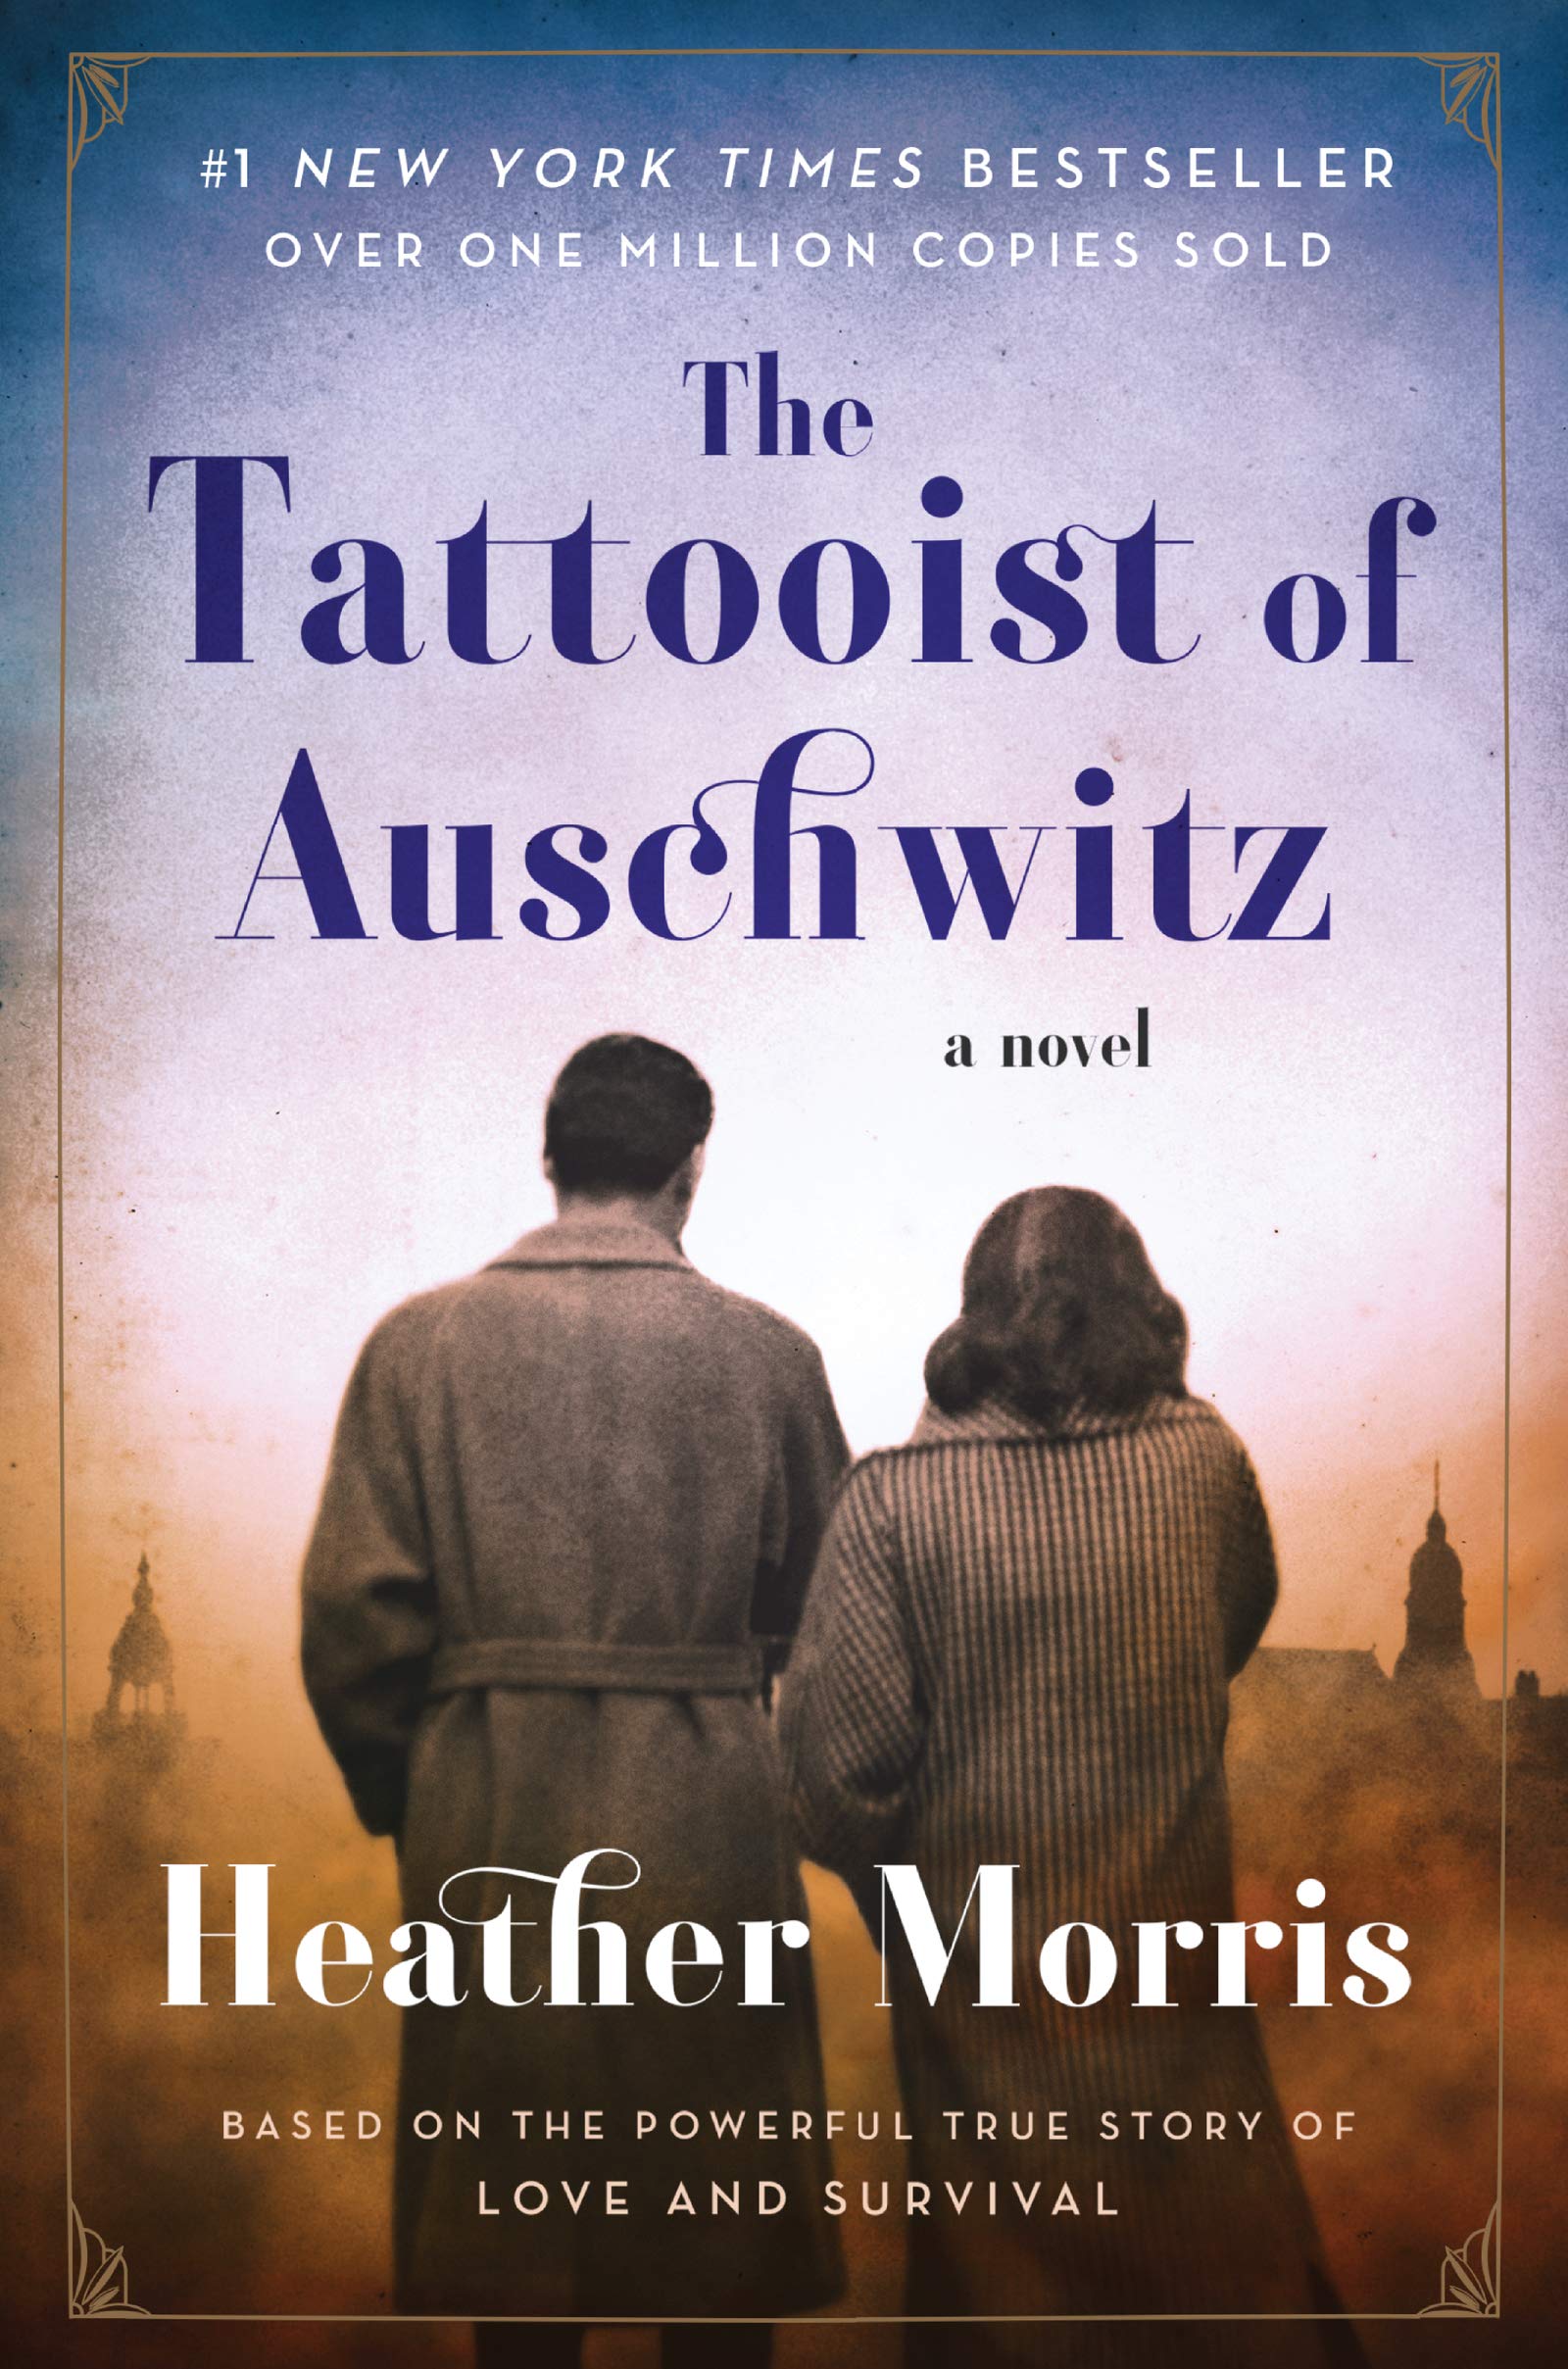 Image for "The Tattooist of Auschwitz"